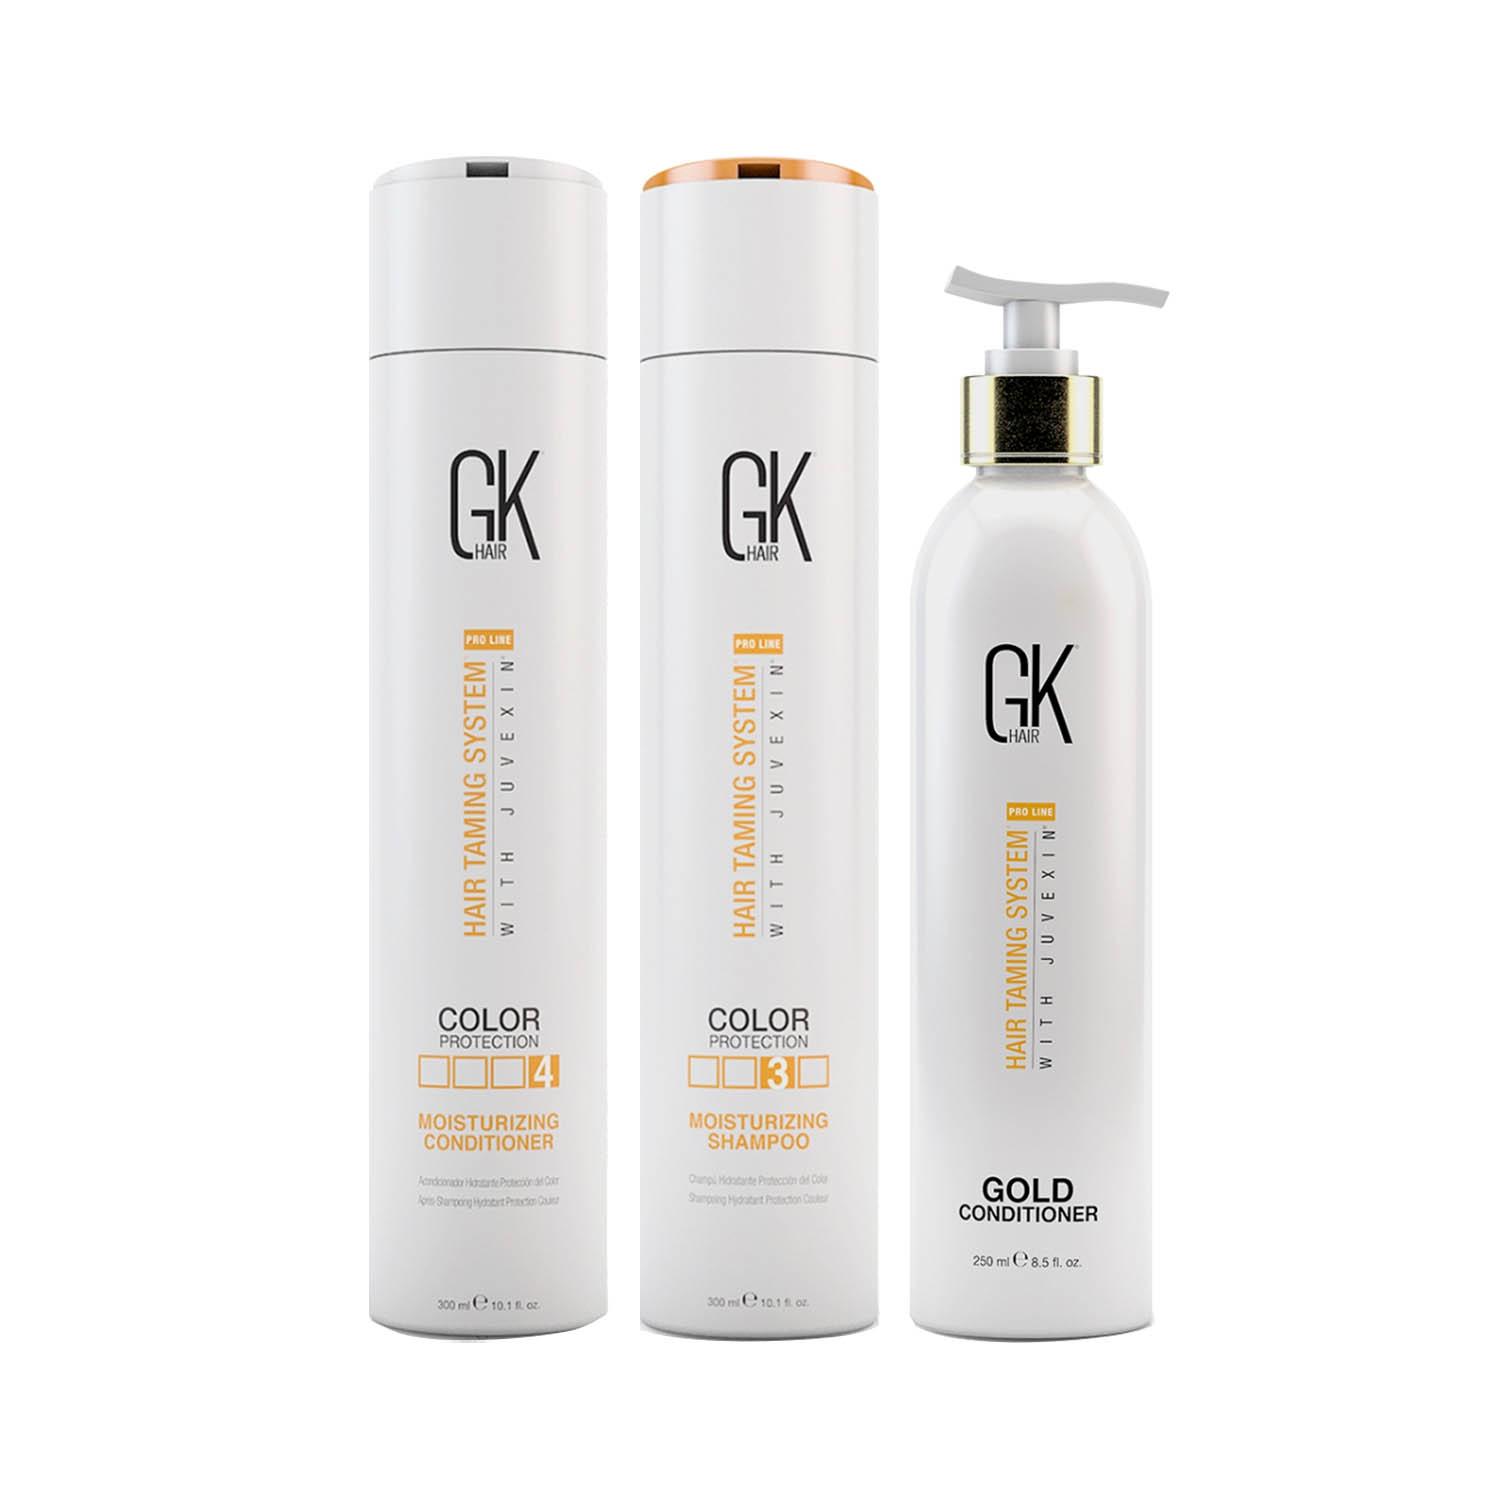 GK Hair | GK Hair Moisturizing Shampoo and Conditioner 300ml with Gold Condtioner 250ml